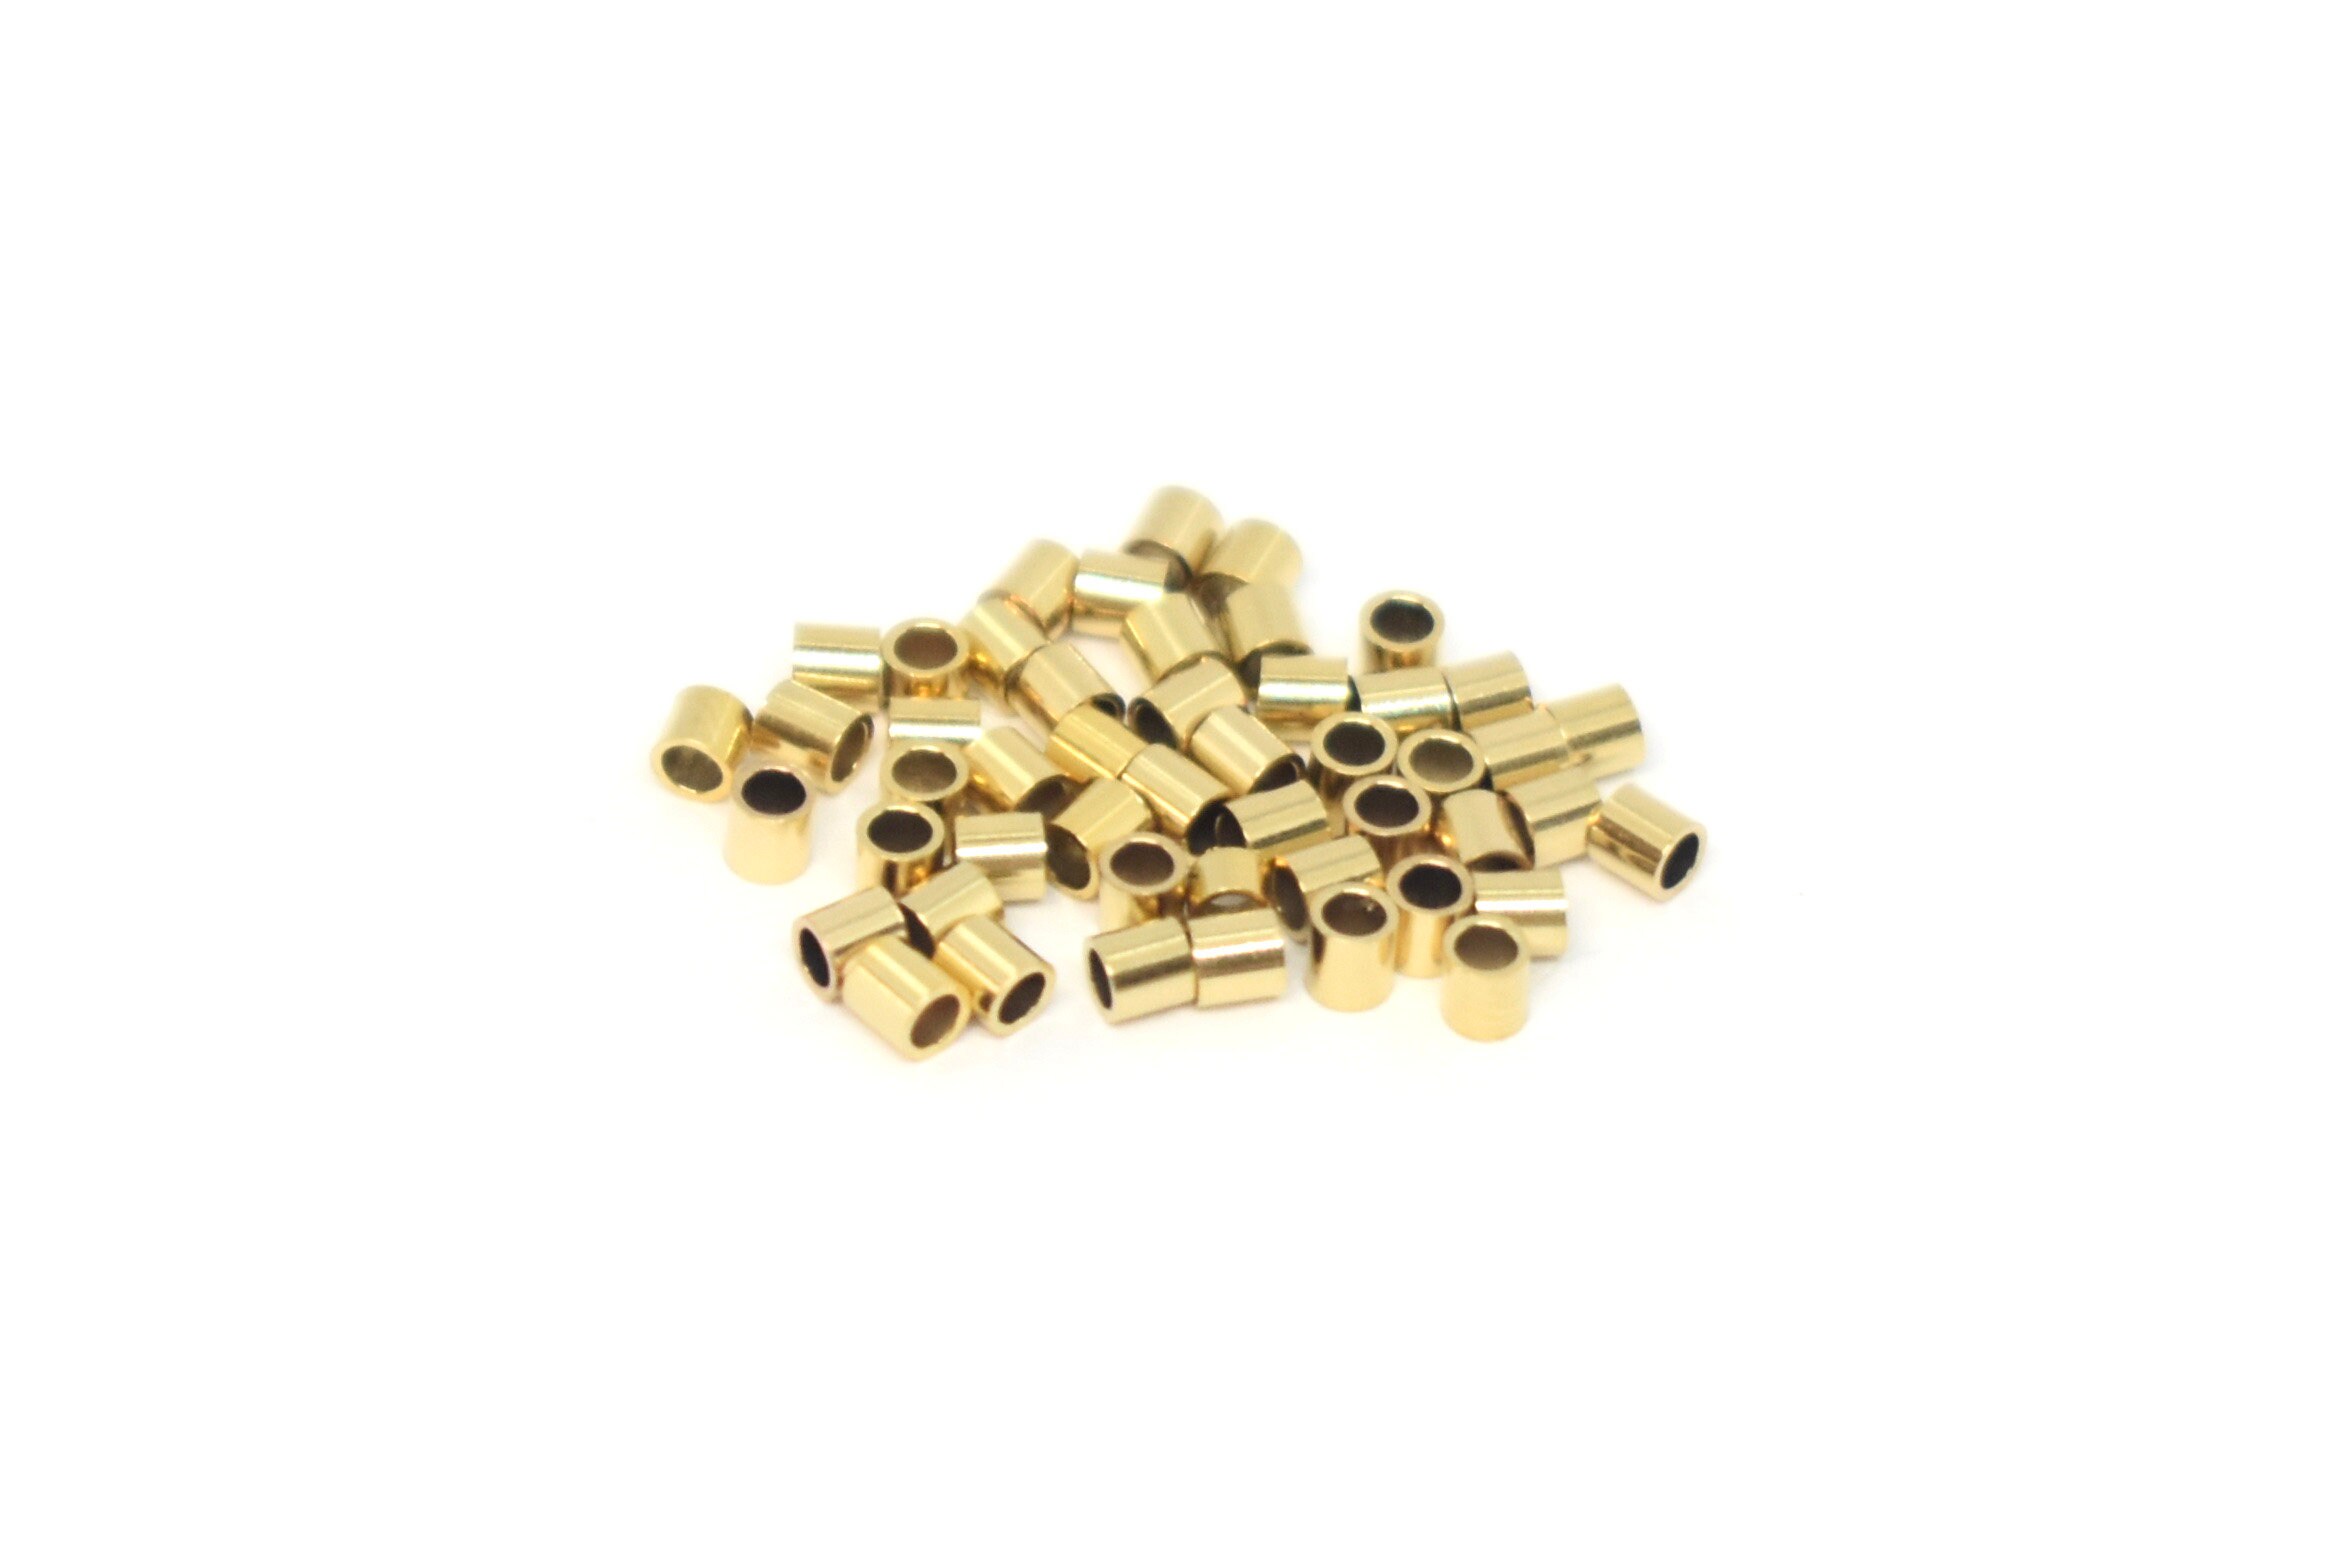 Crimp Beads-sterling Silver, 14k Gold Filled, 14k Rose Gold Filled, 2x2mm  or 2x3mm, 20 Pcs, Crimp Tubes for Jewelry Making, Jewelry Supplies 